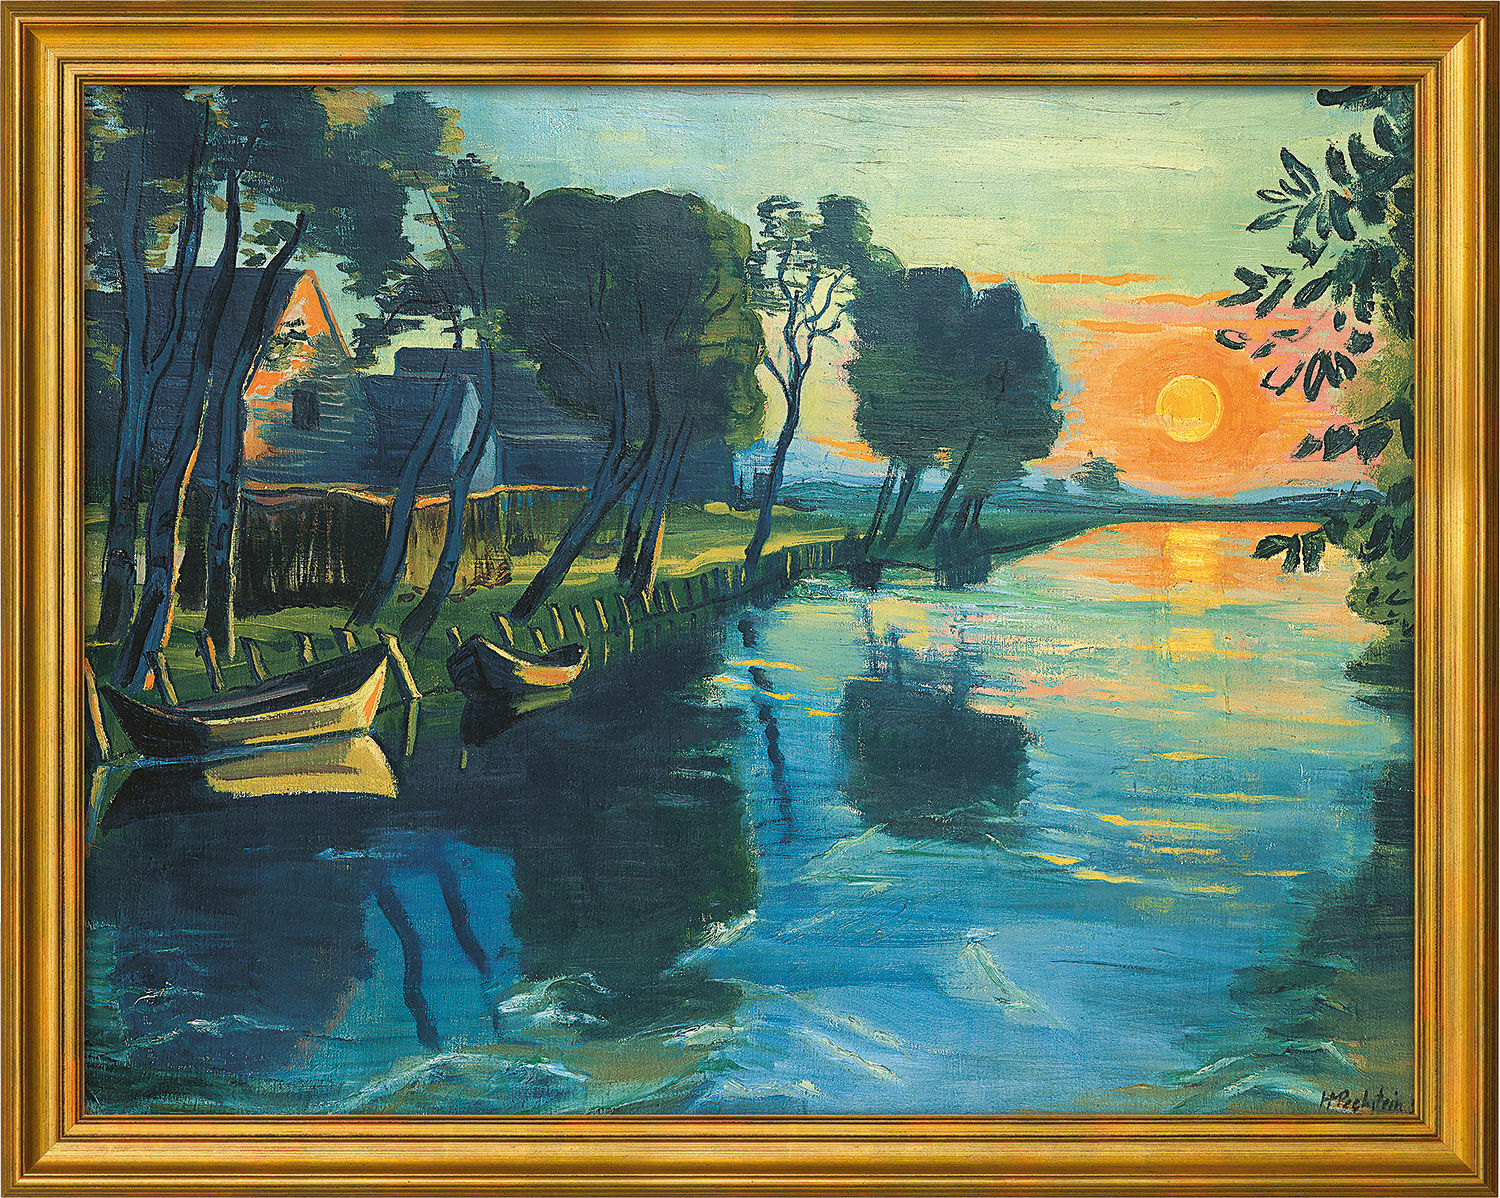 Picture "The First Rays of Sunshine on the Millrace" (c. 1934), golden framed version by Max Pechstein